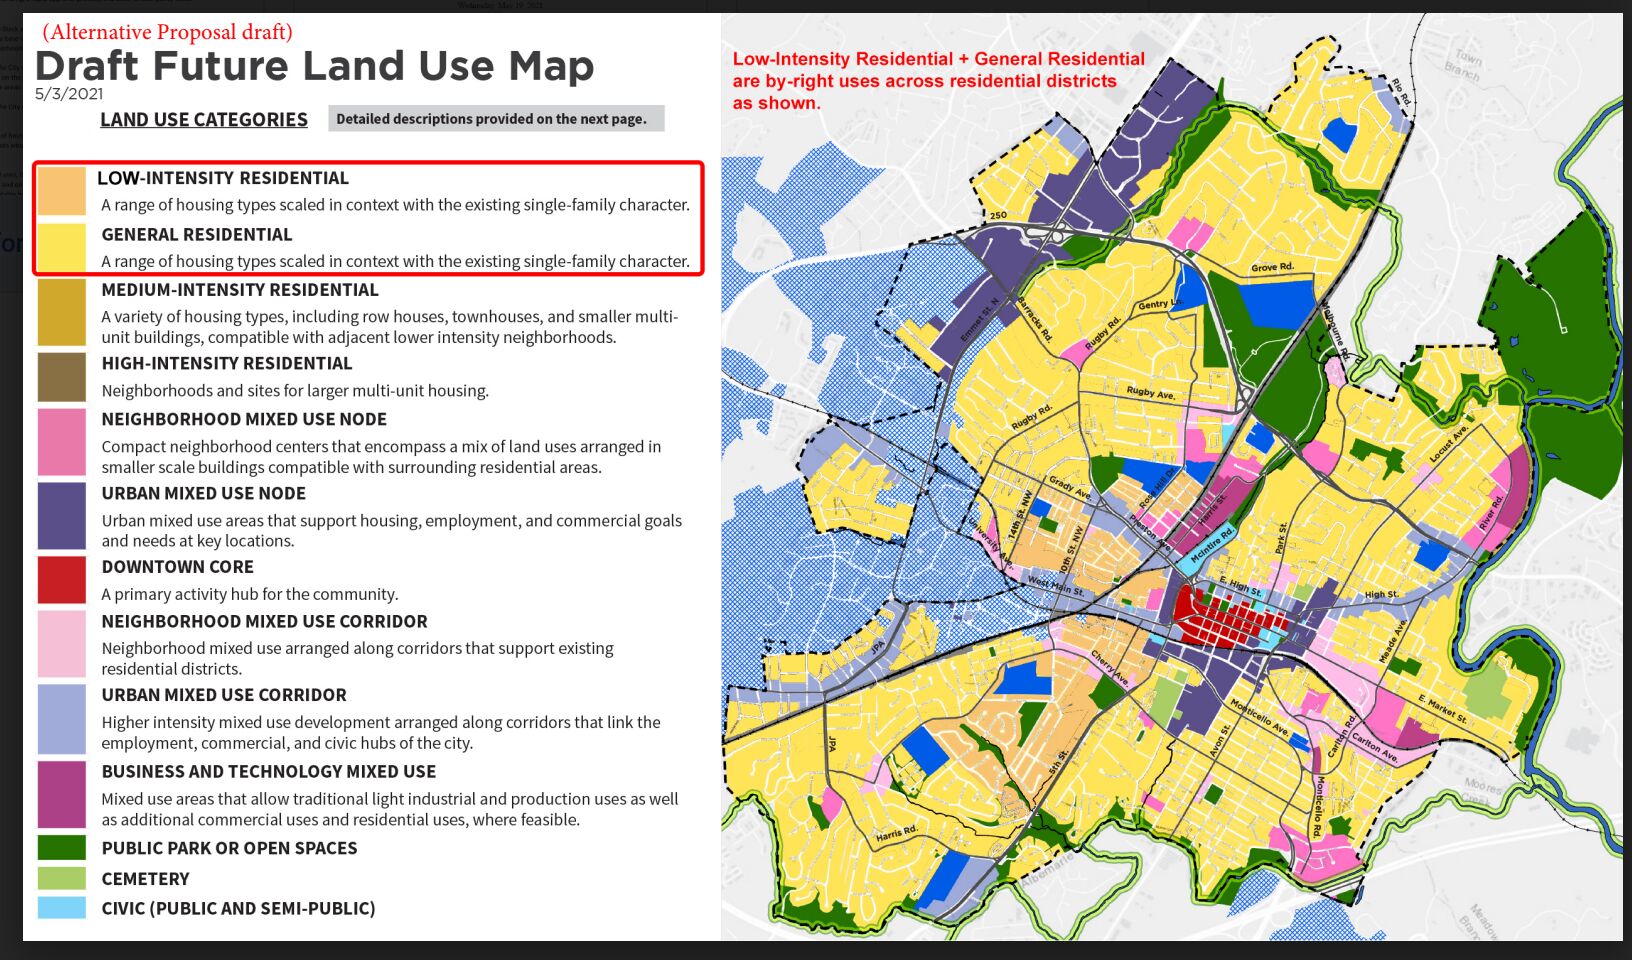 Proposed framework could change city's future land use map implementation